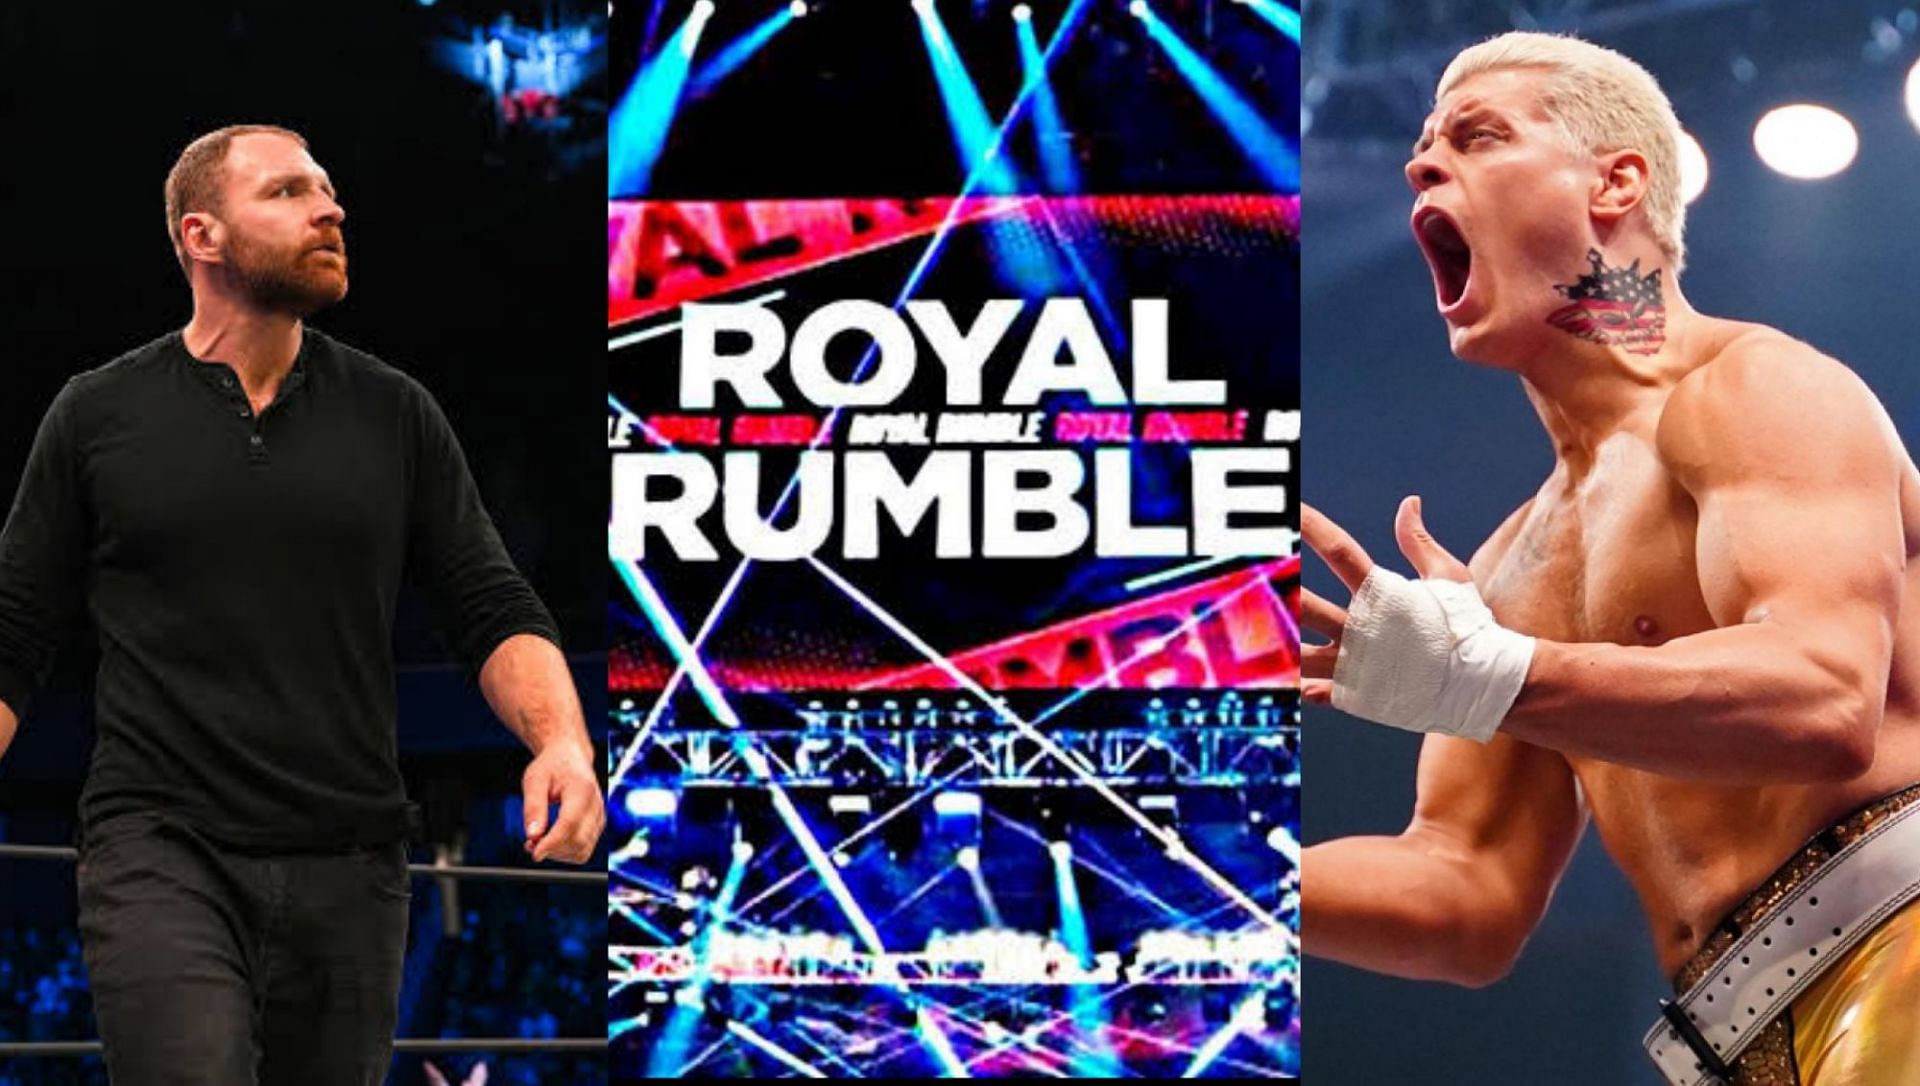 Will there be an AEW surprise entrant at the Royal Rumble?